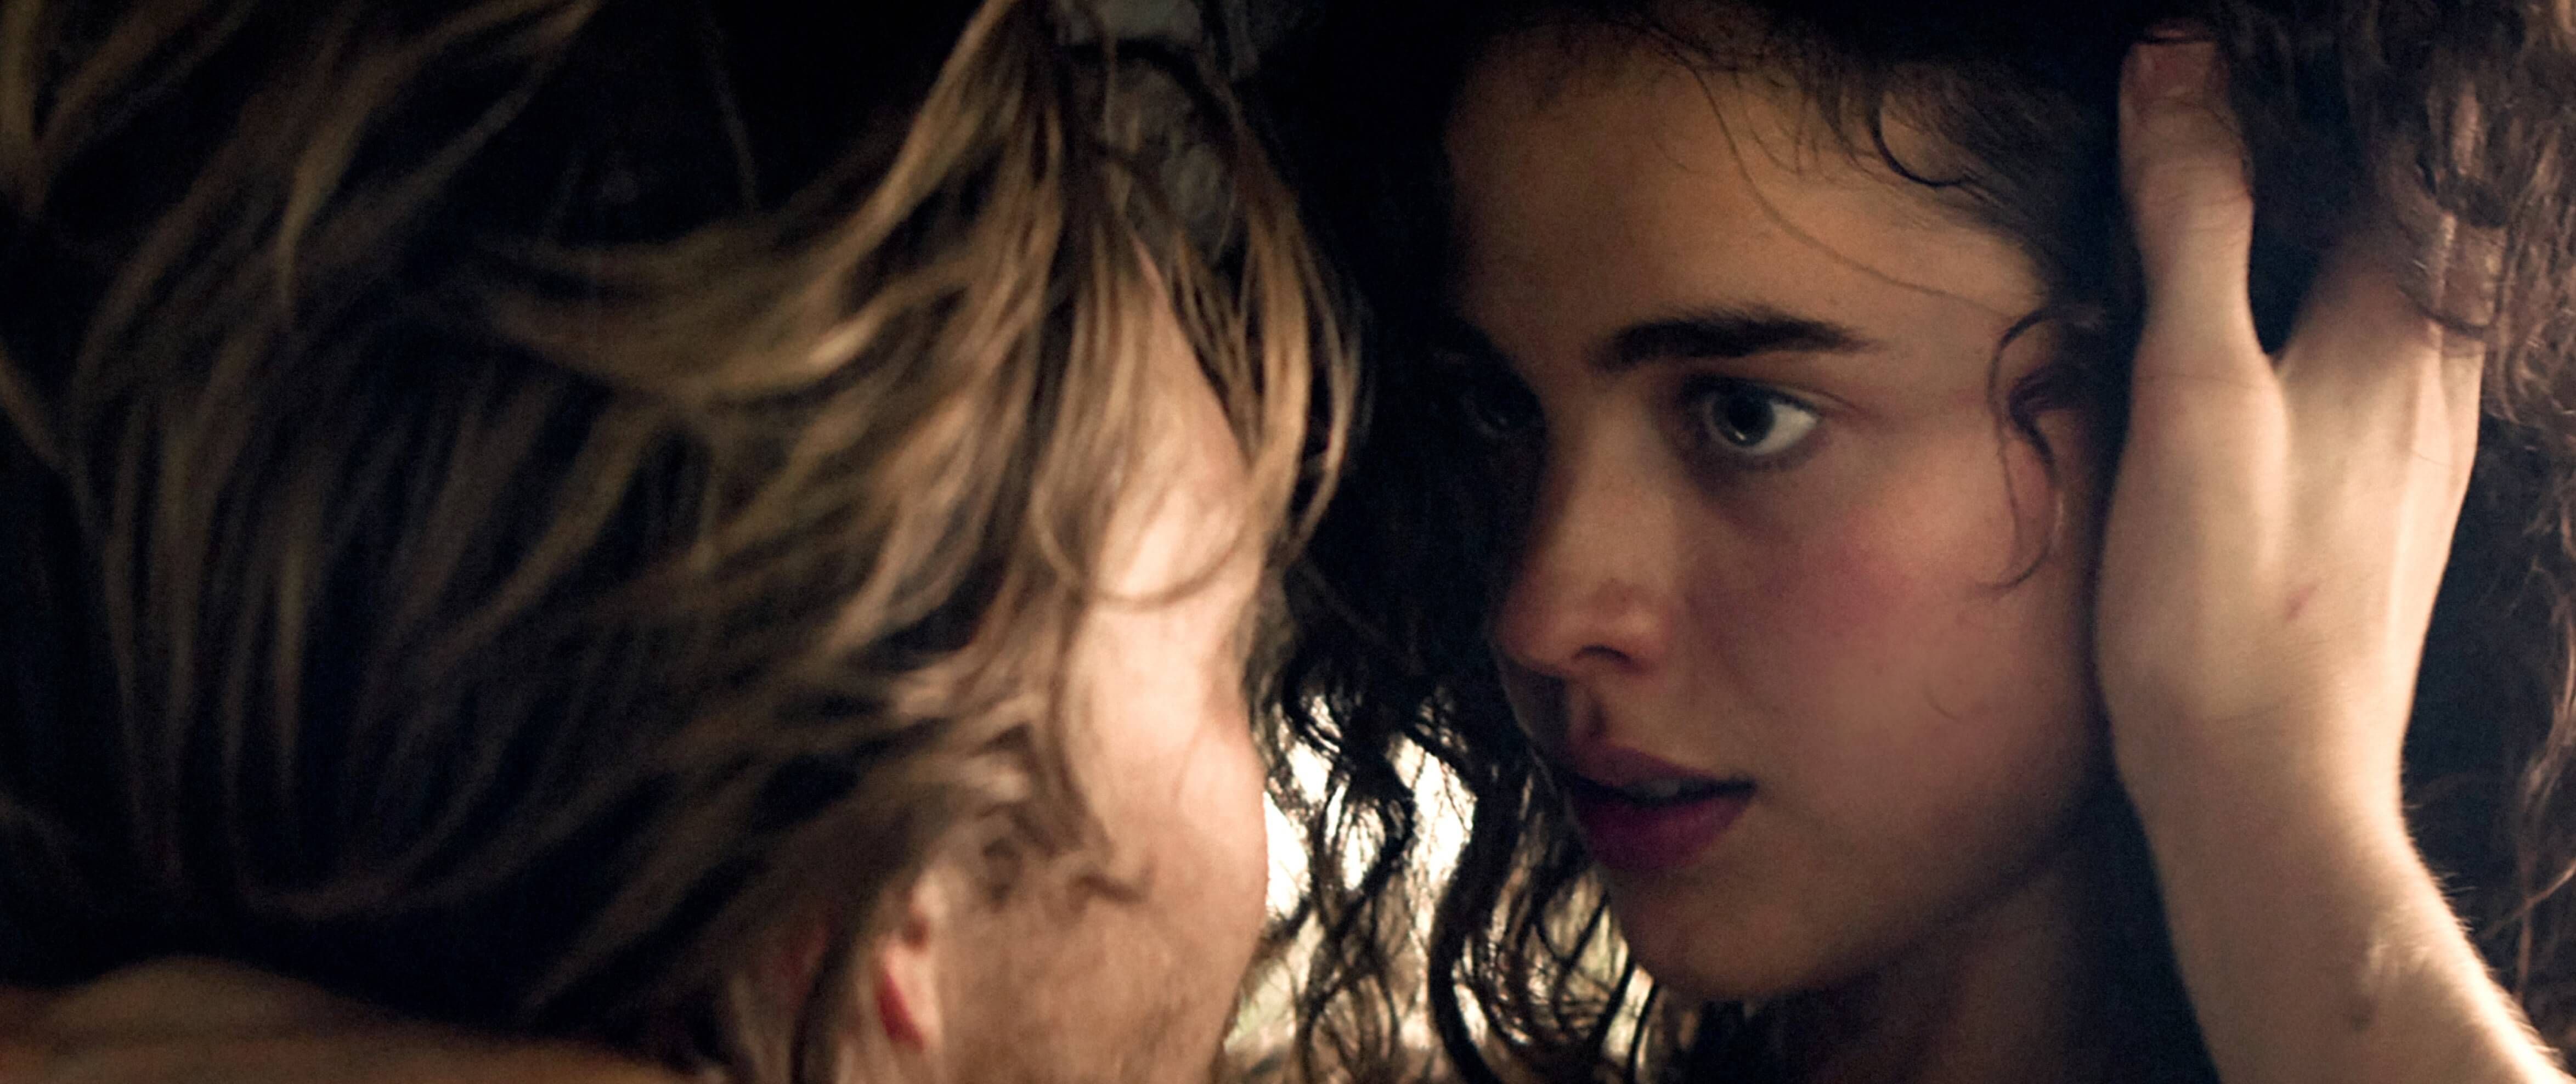 Bad romance: Joe Alwyn and Margaret Qualley get down in "The Stars at Noon". / Photo courtesy of A24.